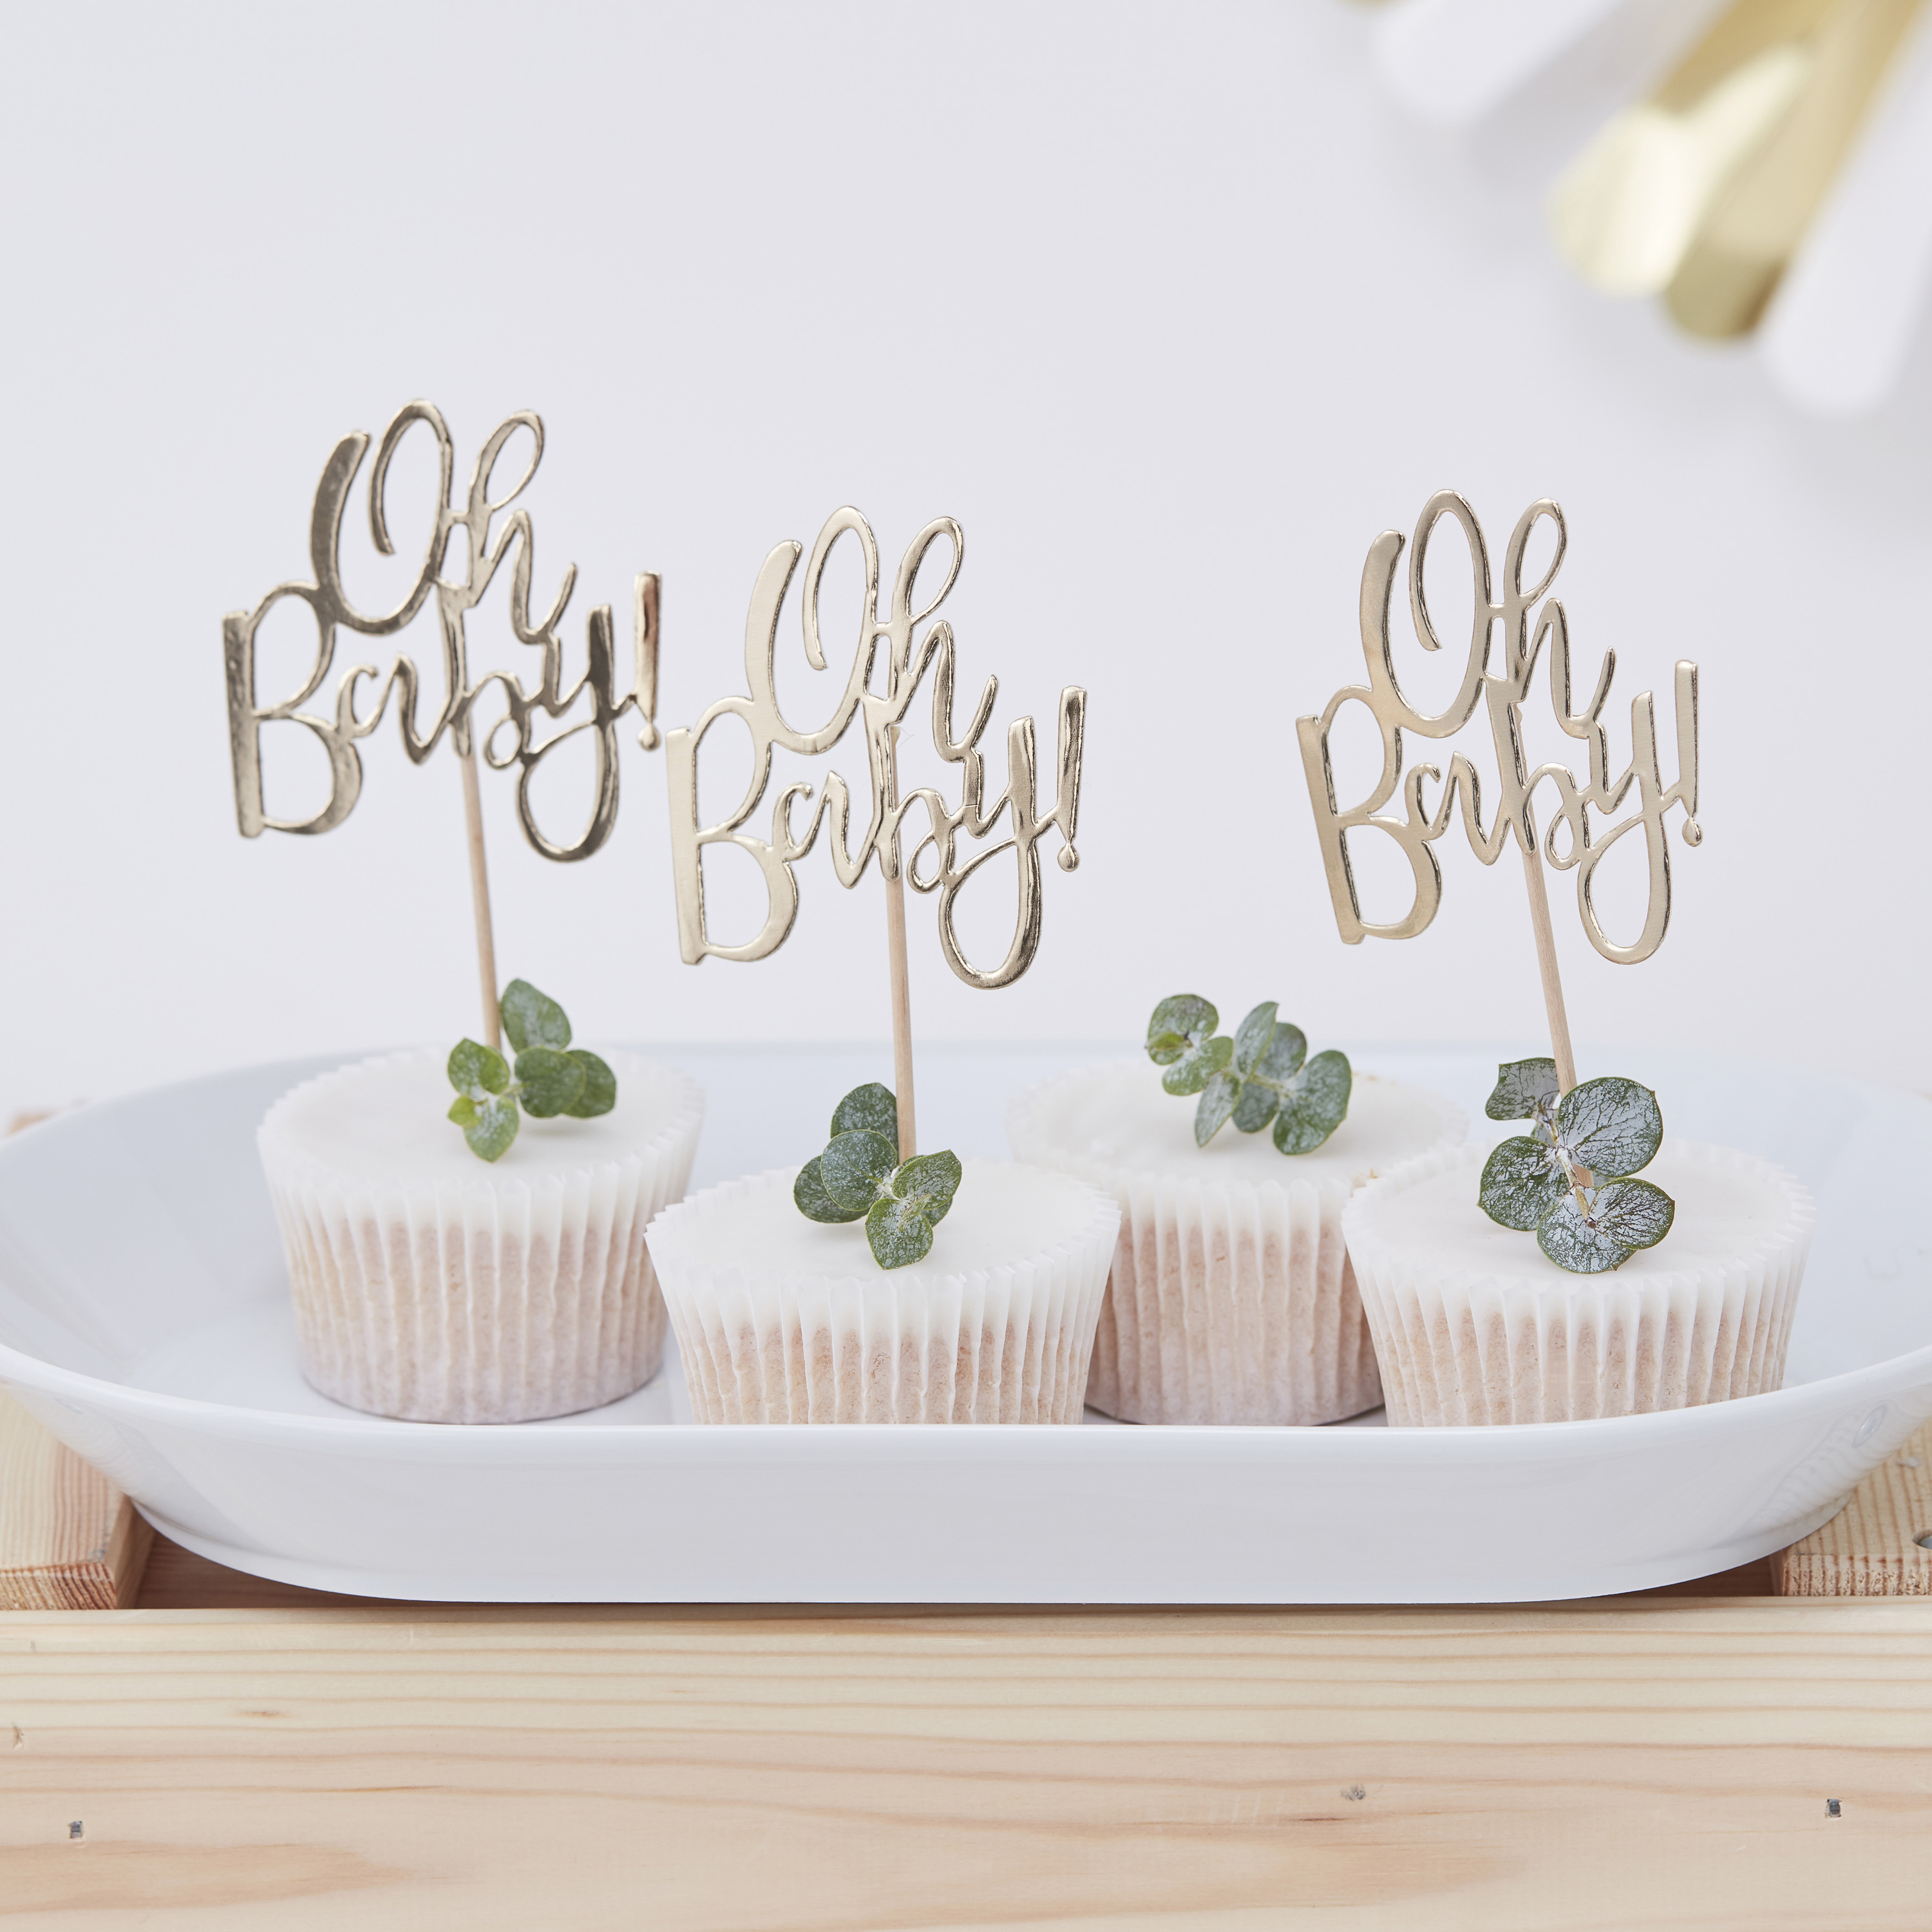 Bridal Shower Theme Cupcake or Cake Toppers Add ANY 12 CUPCAKE TOPPERS Baby Shower Birthday Pick Any Theme in My Shop 